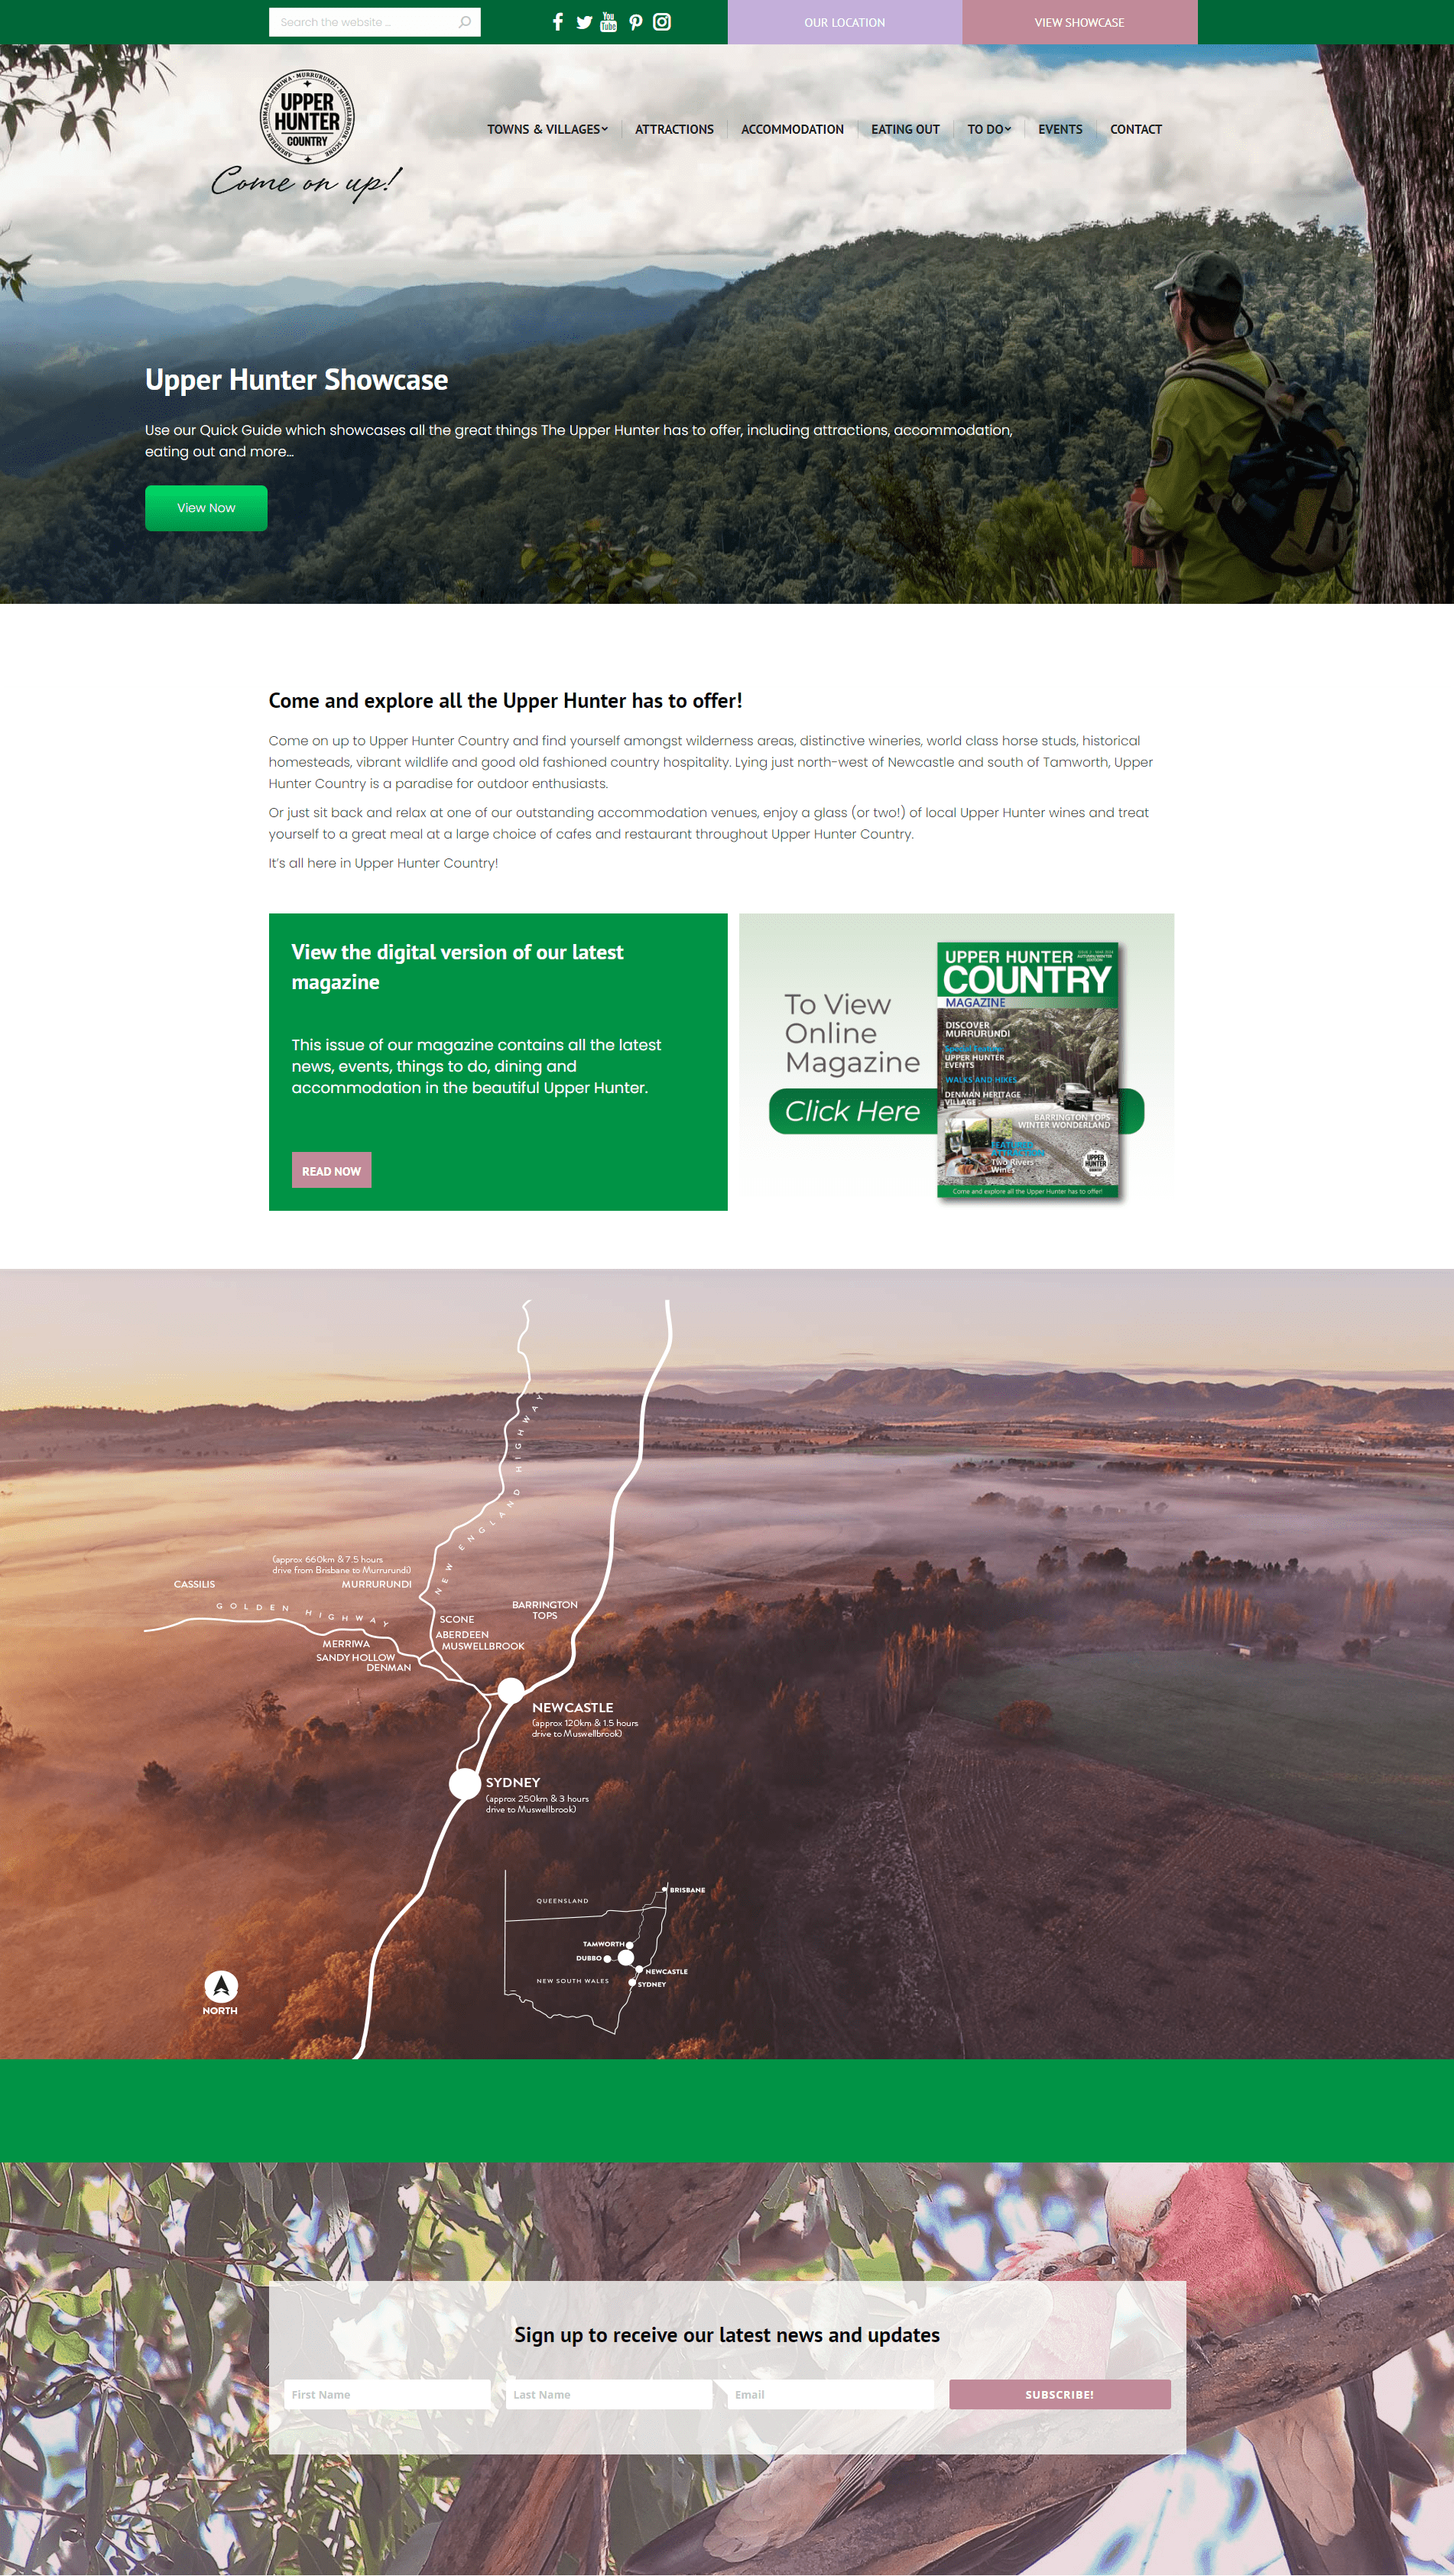 Website Re-designs, Updates and Upgrades: Upper Hunter Country Tourism